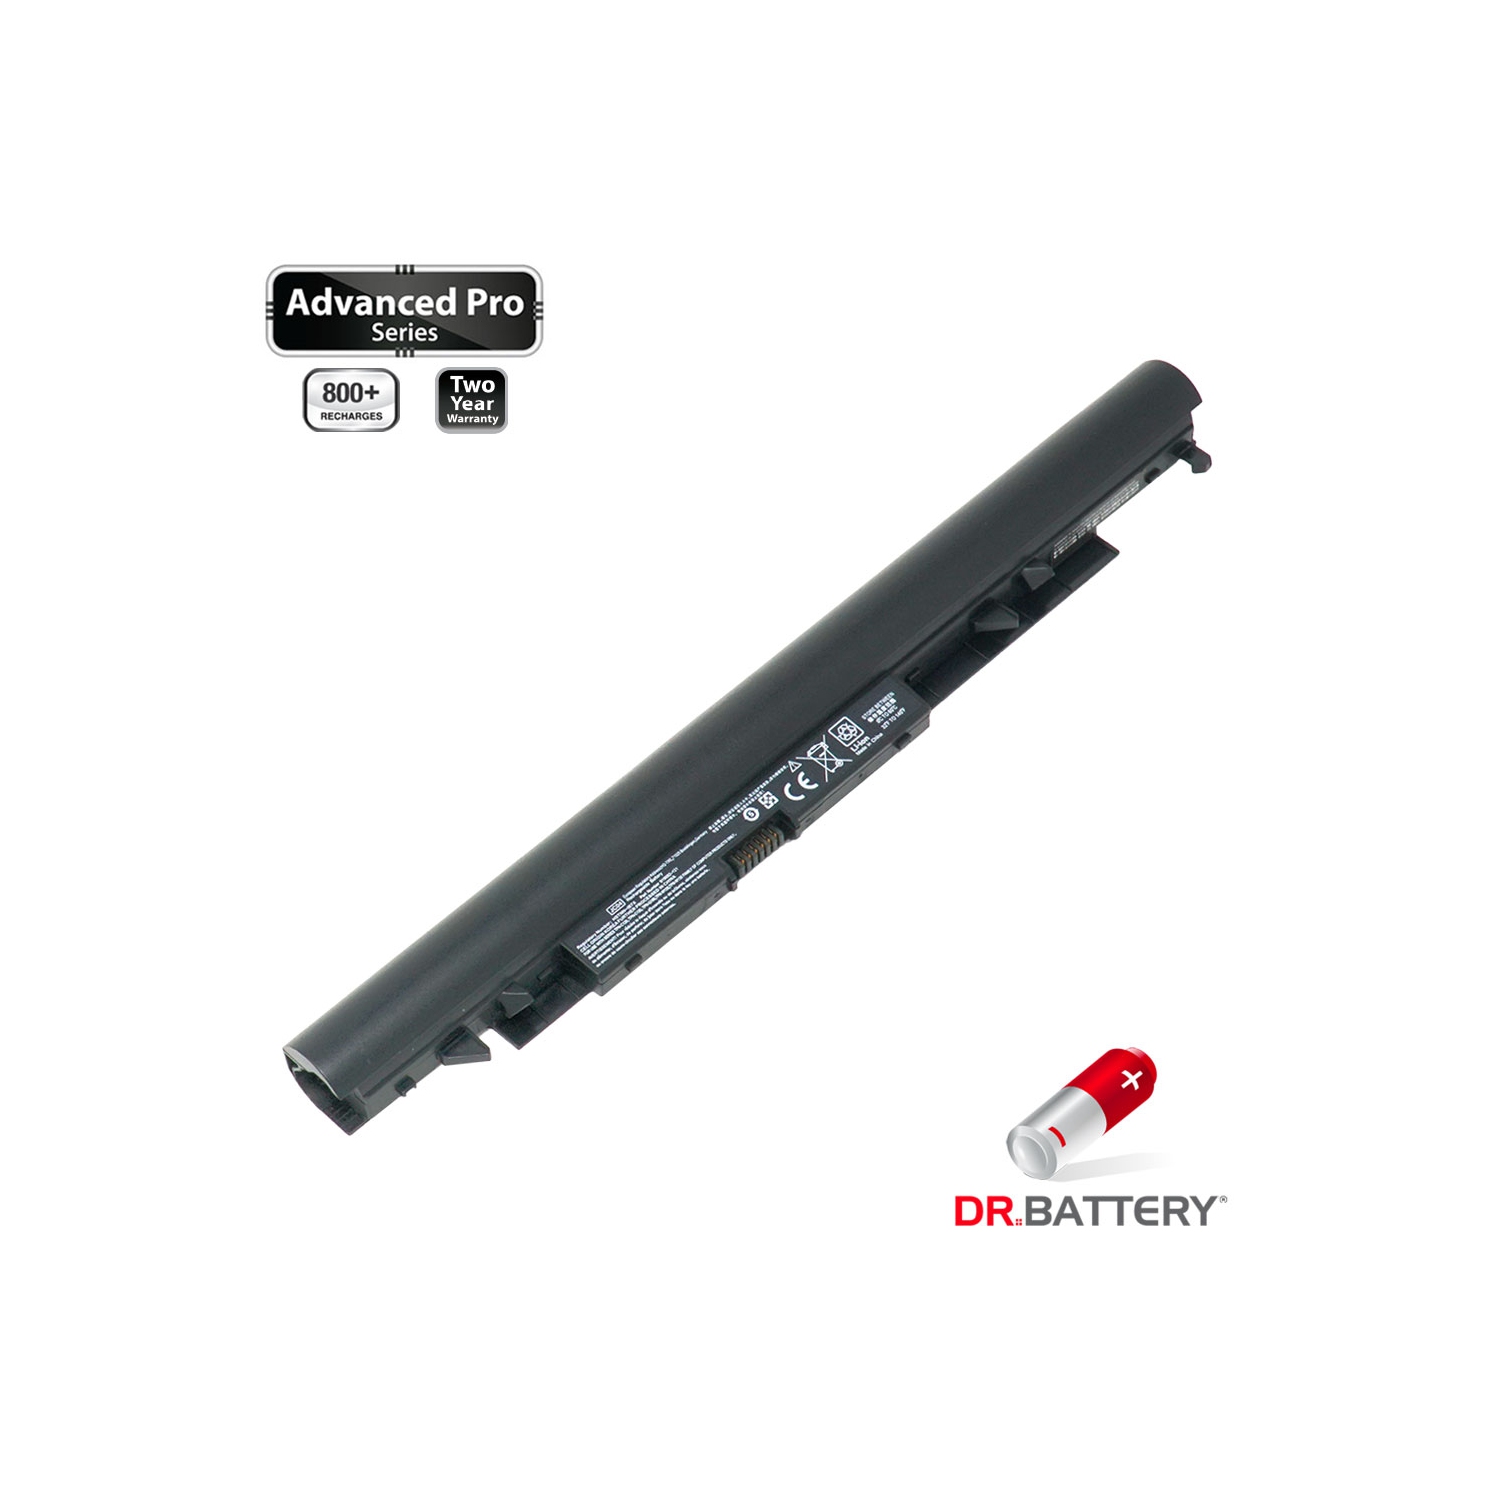 Dr. Battery - Samsung SDI Cells for HP 240 G6 2PC92PA / 245 G5 / 245 G5 Y0T72PA / 2LP34AA / 919681-241 - Free Shipping